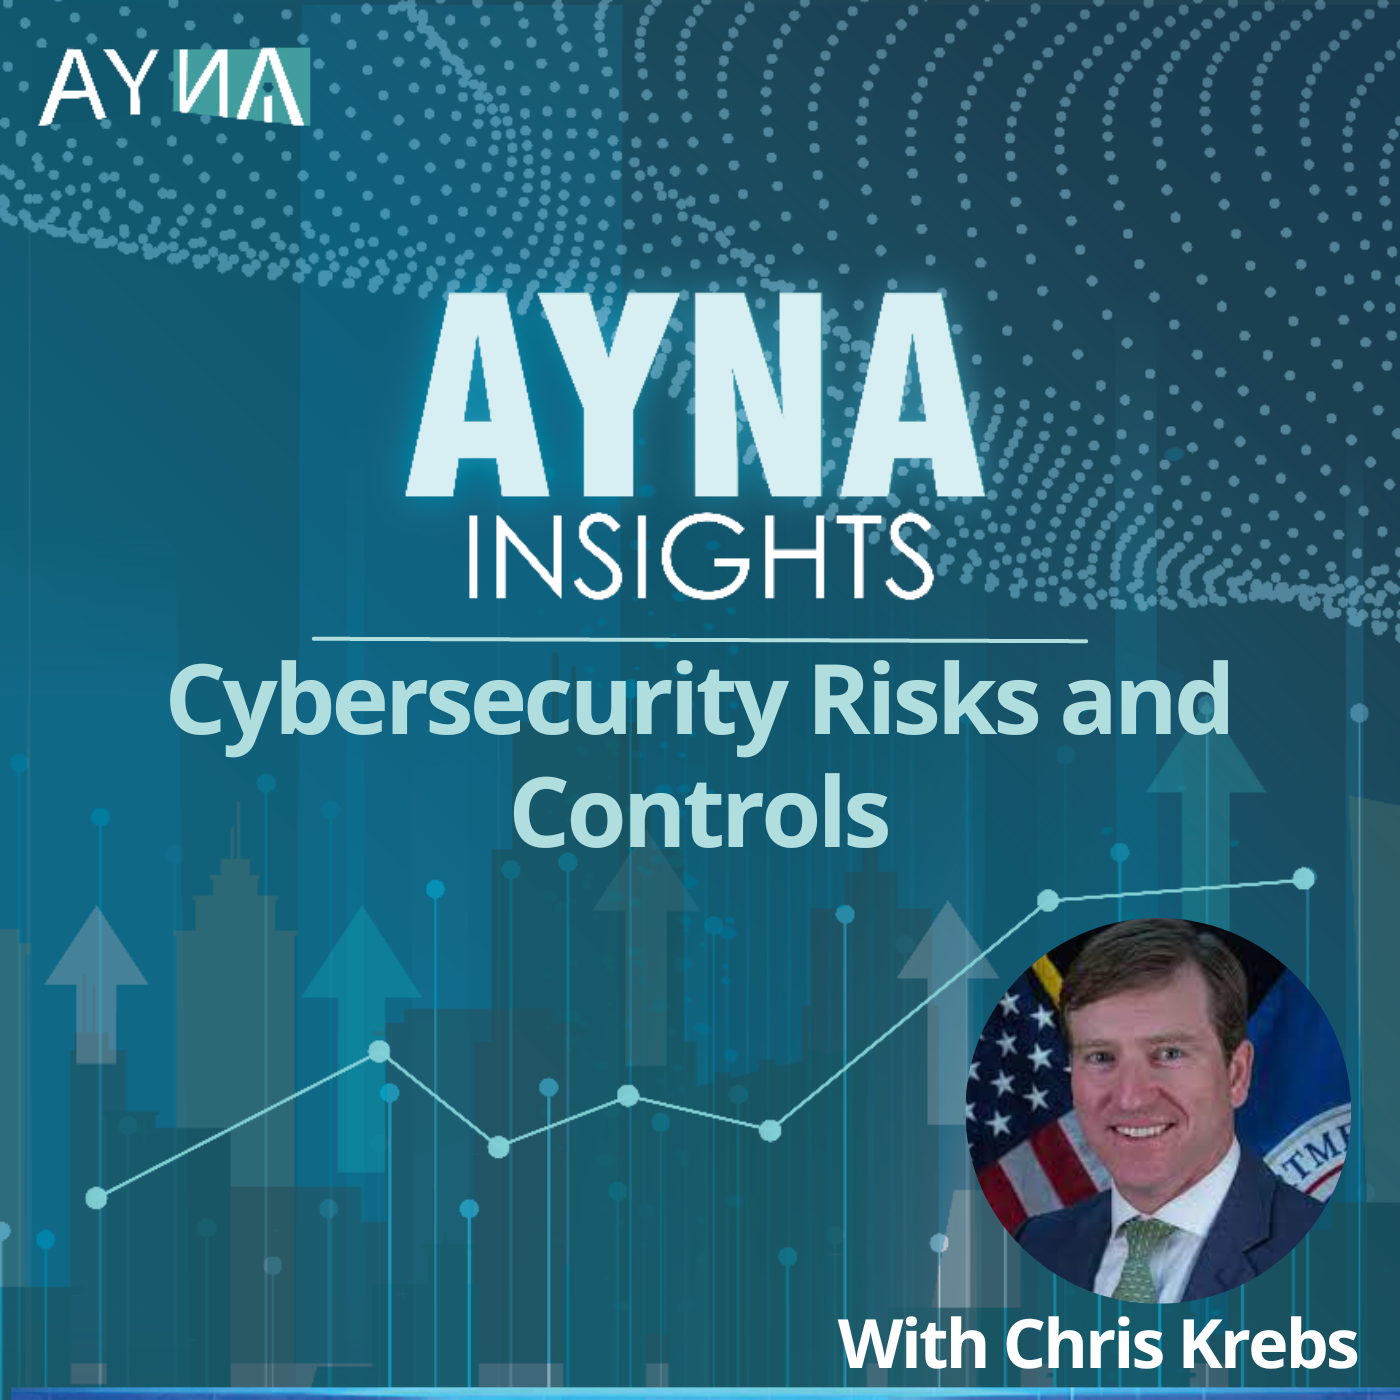 Chris Krebs: Cybersecurity Risks and Controls